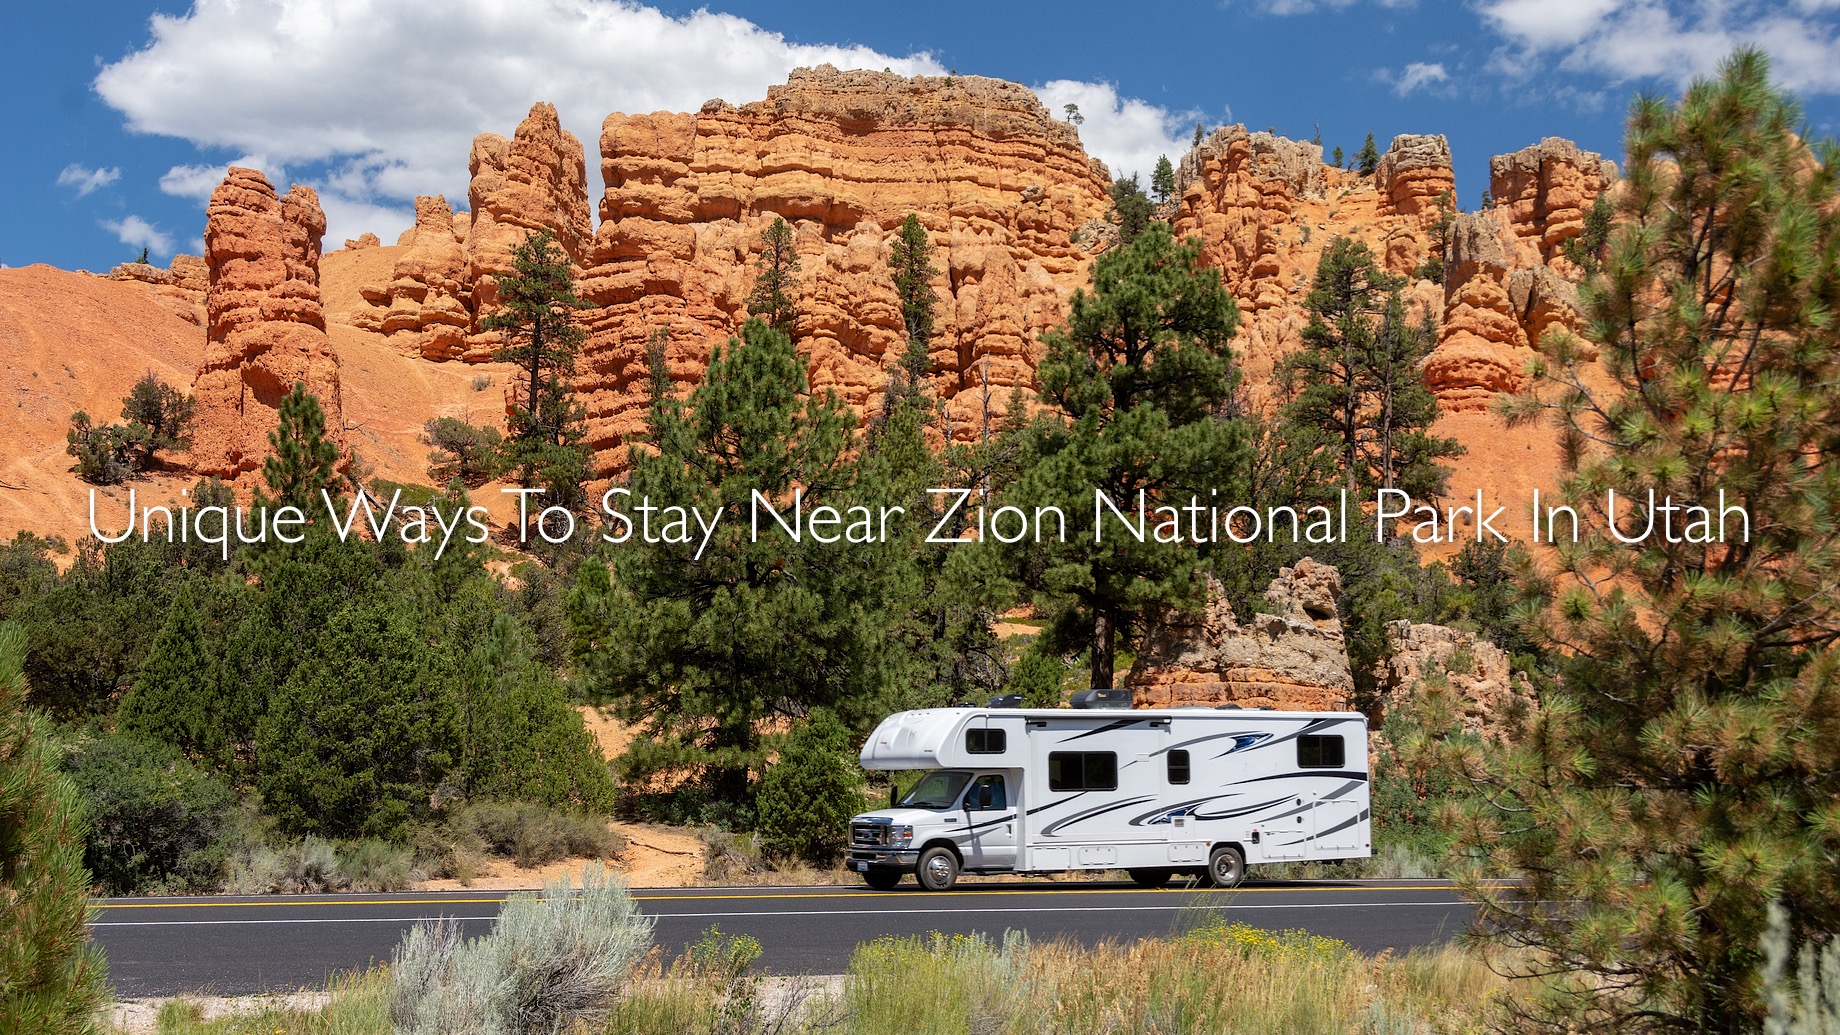 Unique Ways To Stay Near Zion National Park In Utah